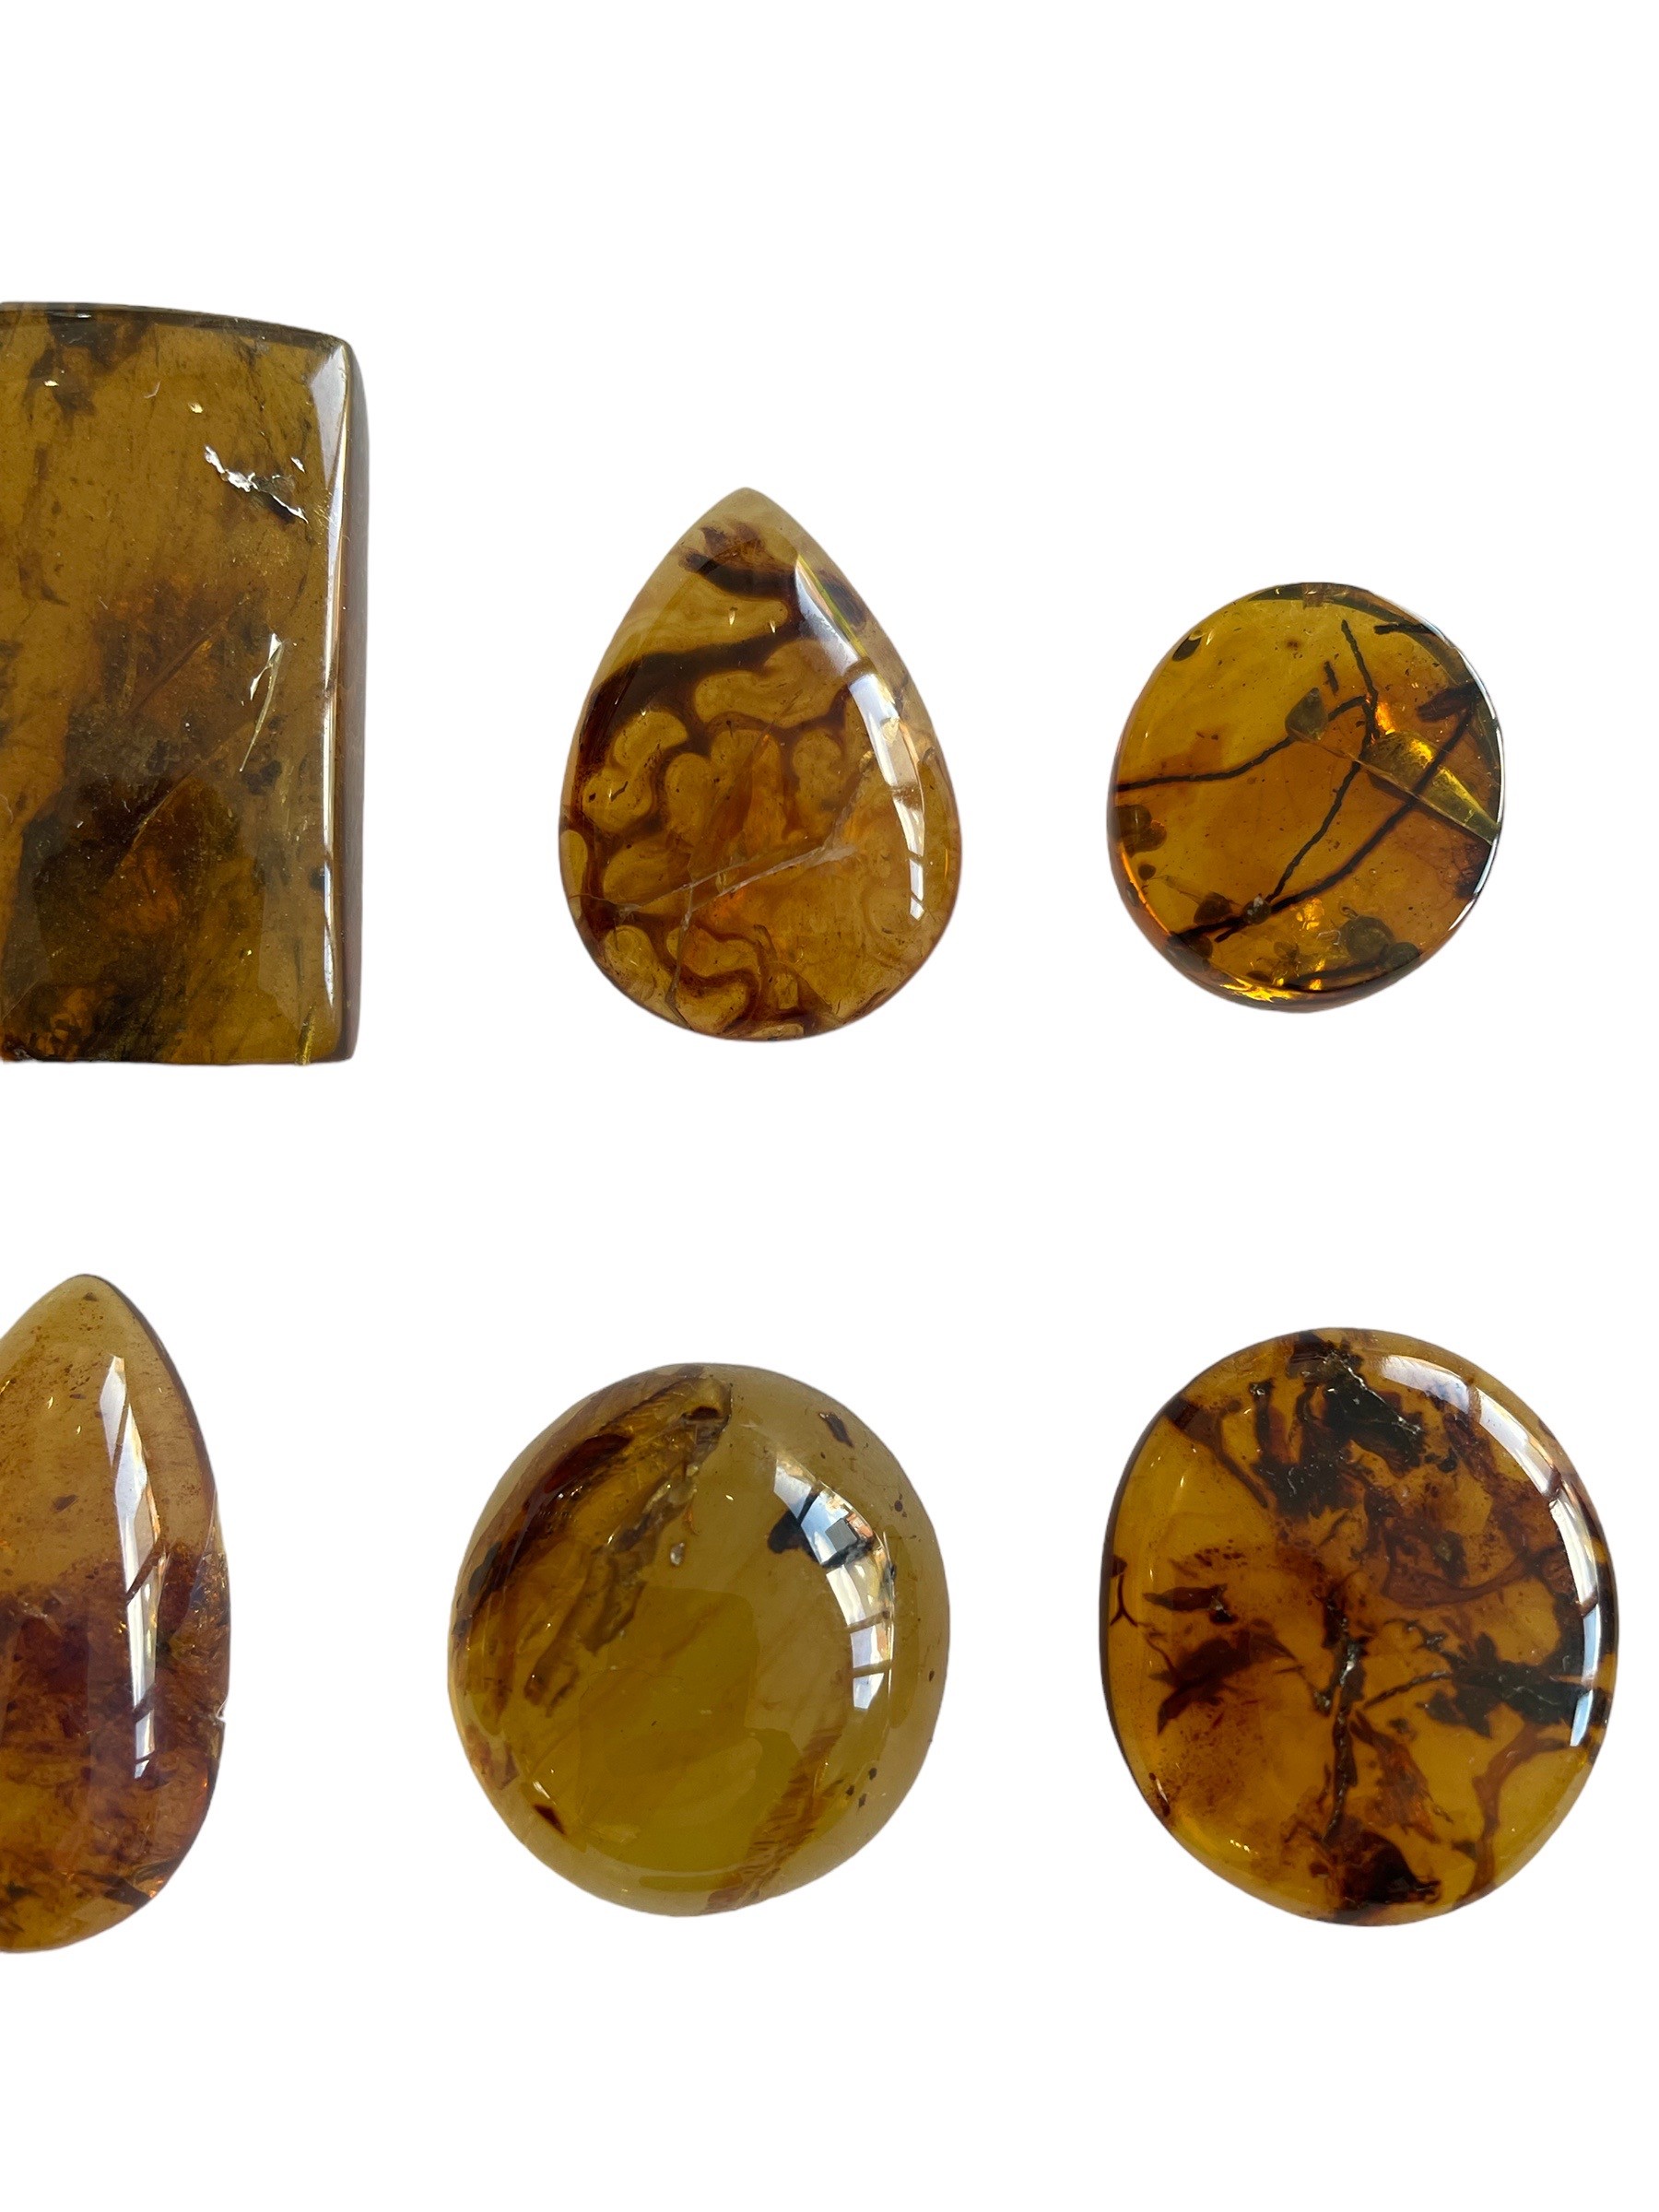 A GROUPING OF PLANT FOSSILS IN DINOSAUR AGED BURMESE AMBER A fantastic grouping of 12 botanical - Image 3 of 4